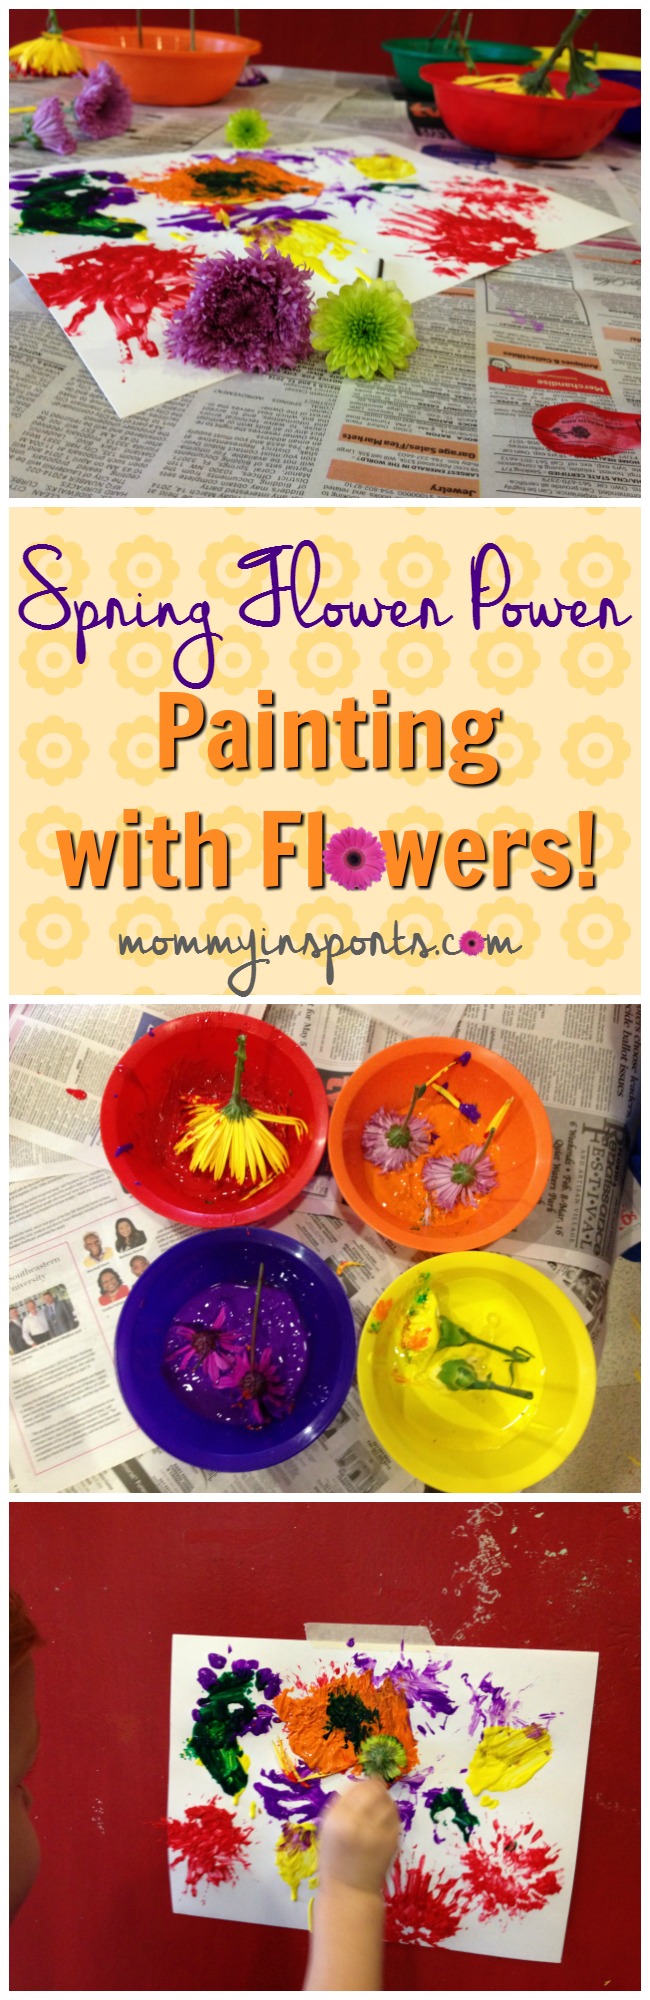 Looking for some fun ways to bring spring to your home? Why not paint with flowers? A fun craft for kids! Check out all of these Spring Flower Power Ideas!